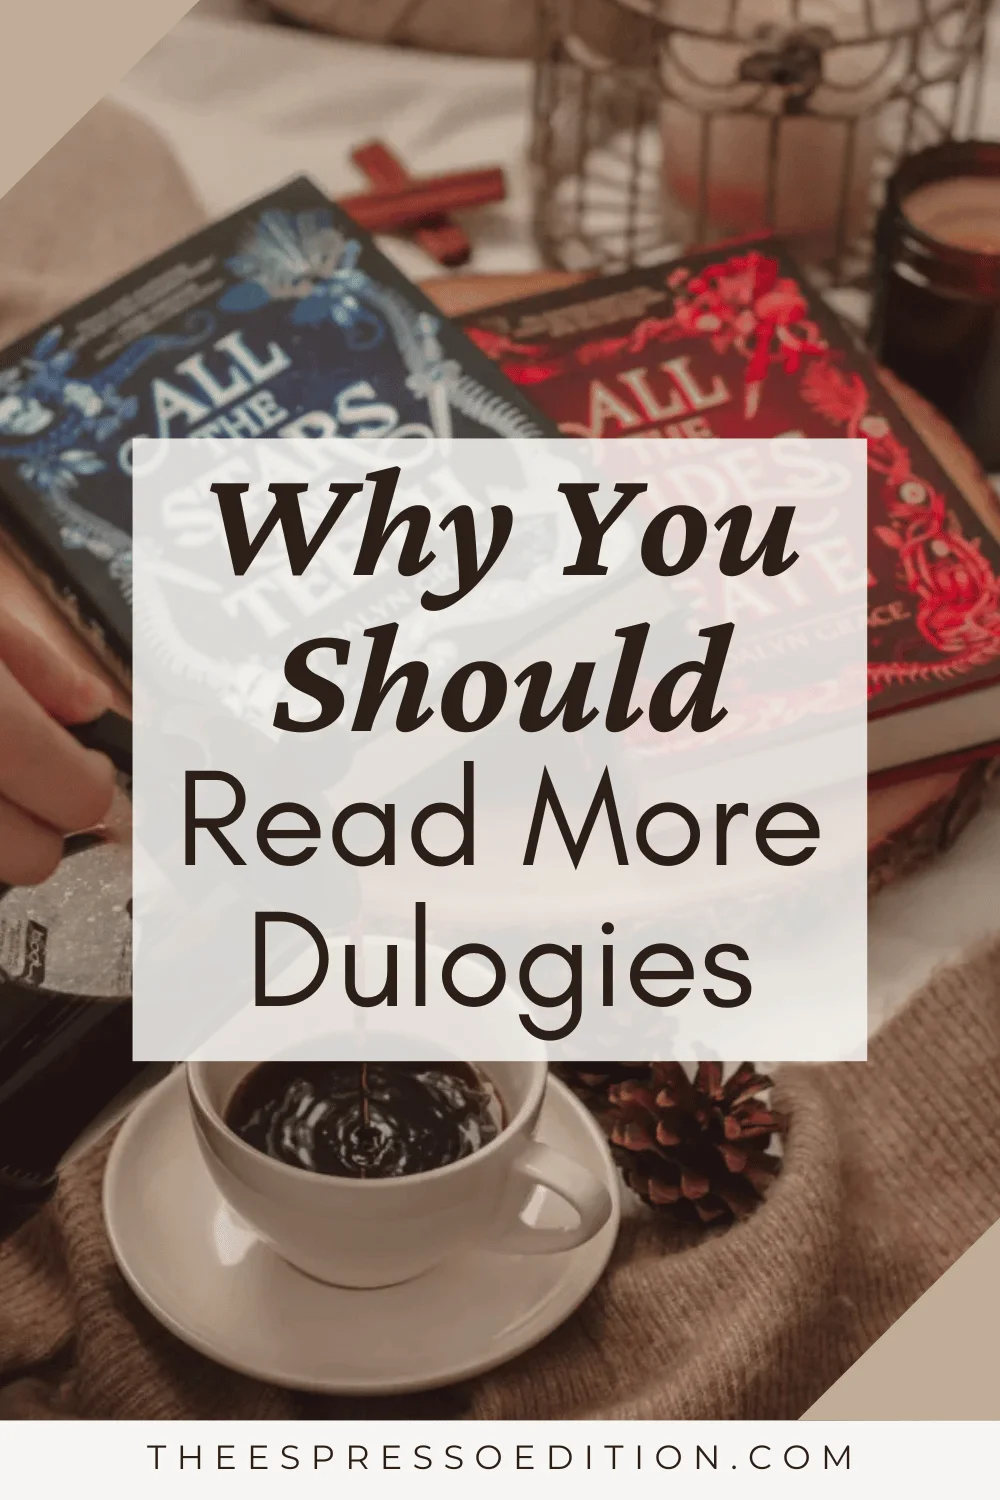 Why You Should Read More Duologies by The Espresso Edition cozy bookish blog